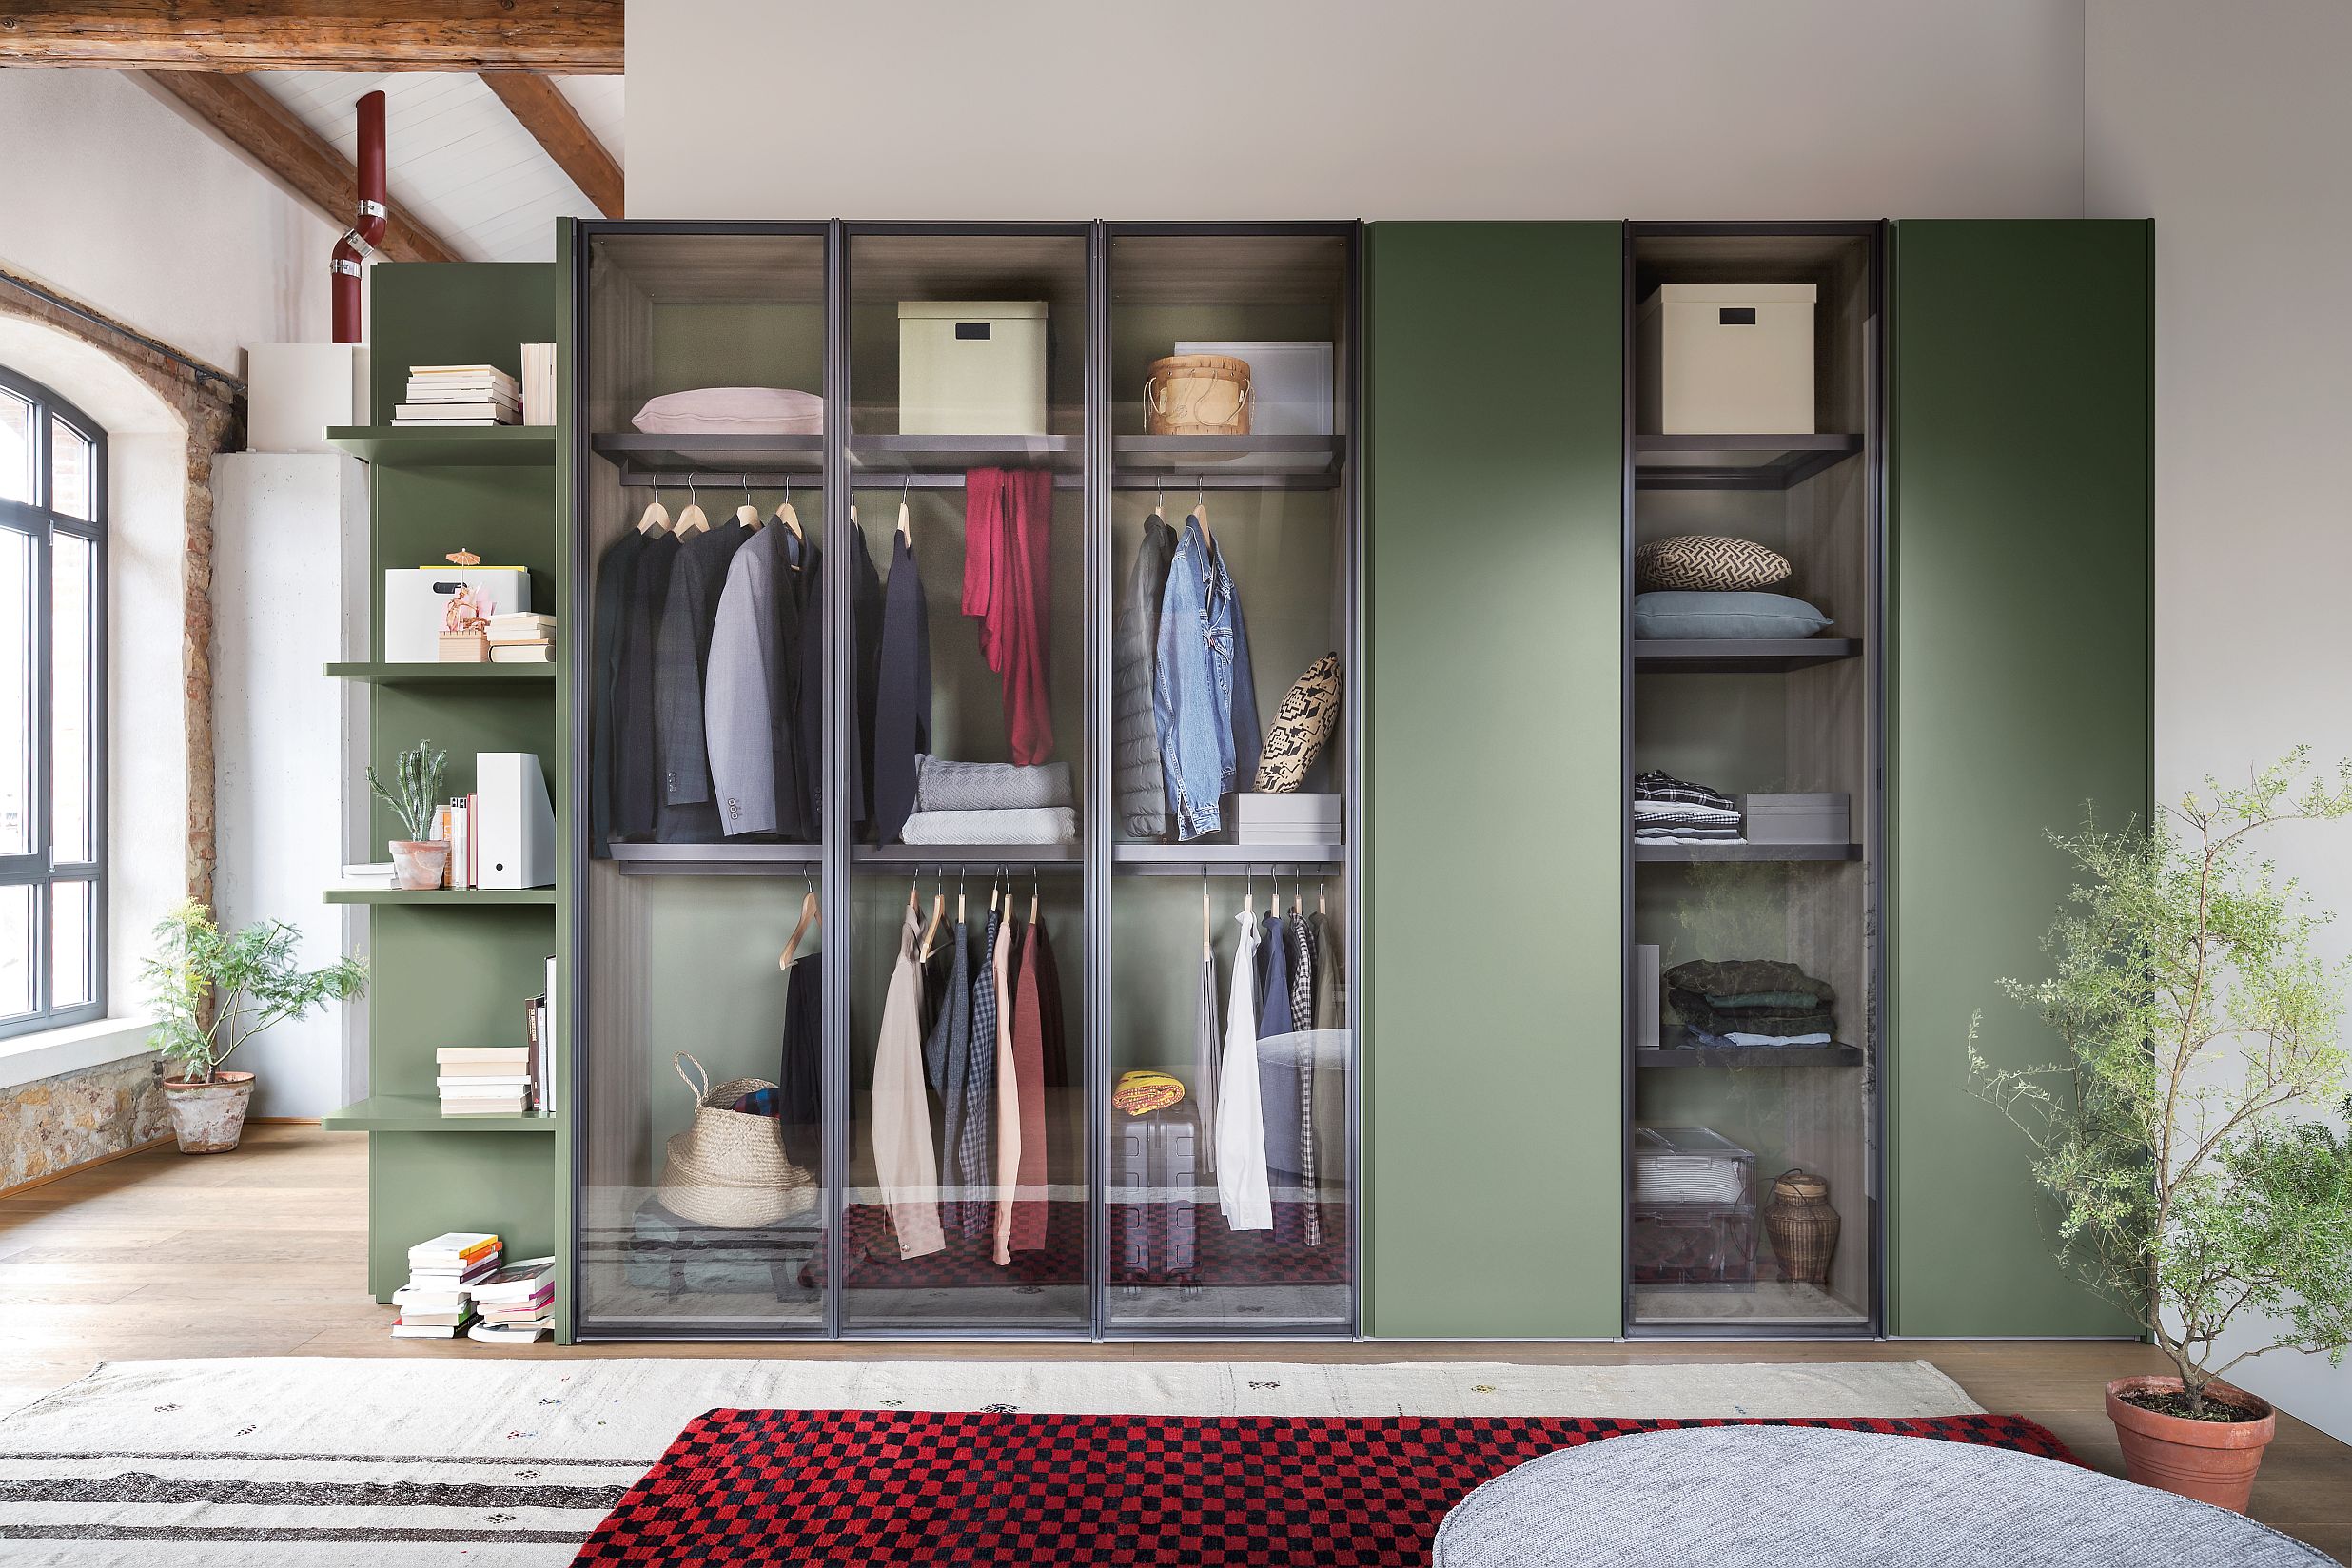 15 fabulous built-in wardrobe ideas for all interior styles | Real Homes